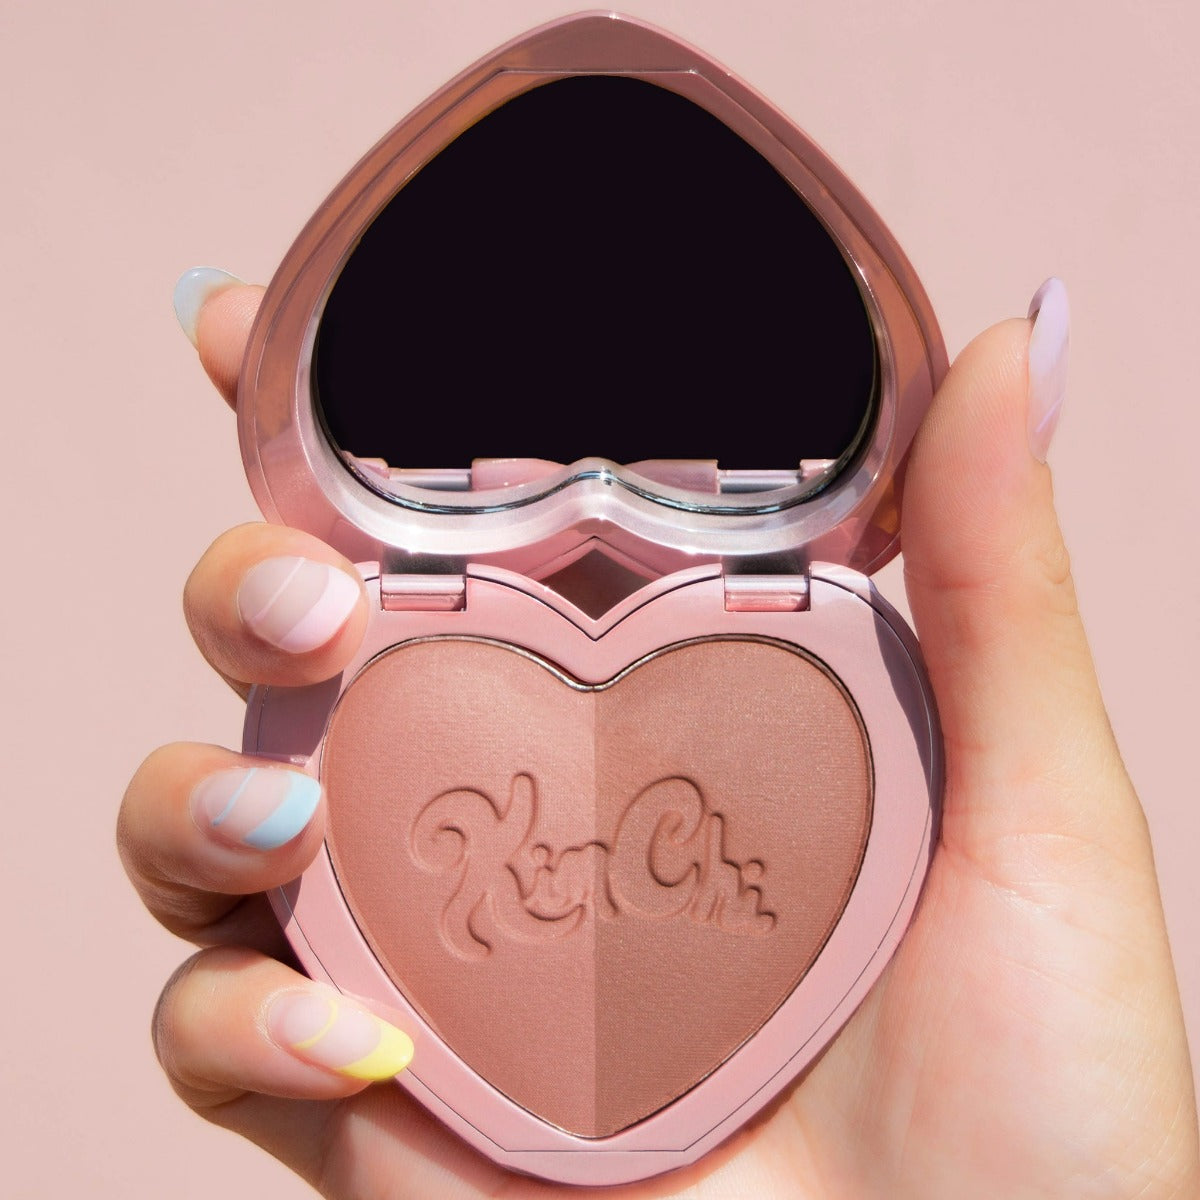 KIMCHI CHIC THAILOR COLLECTION: BLUSH DUO